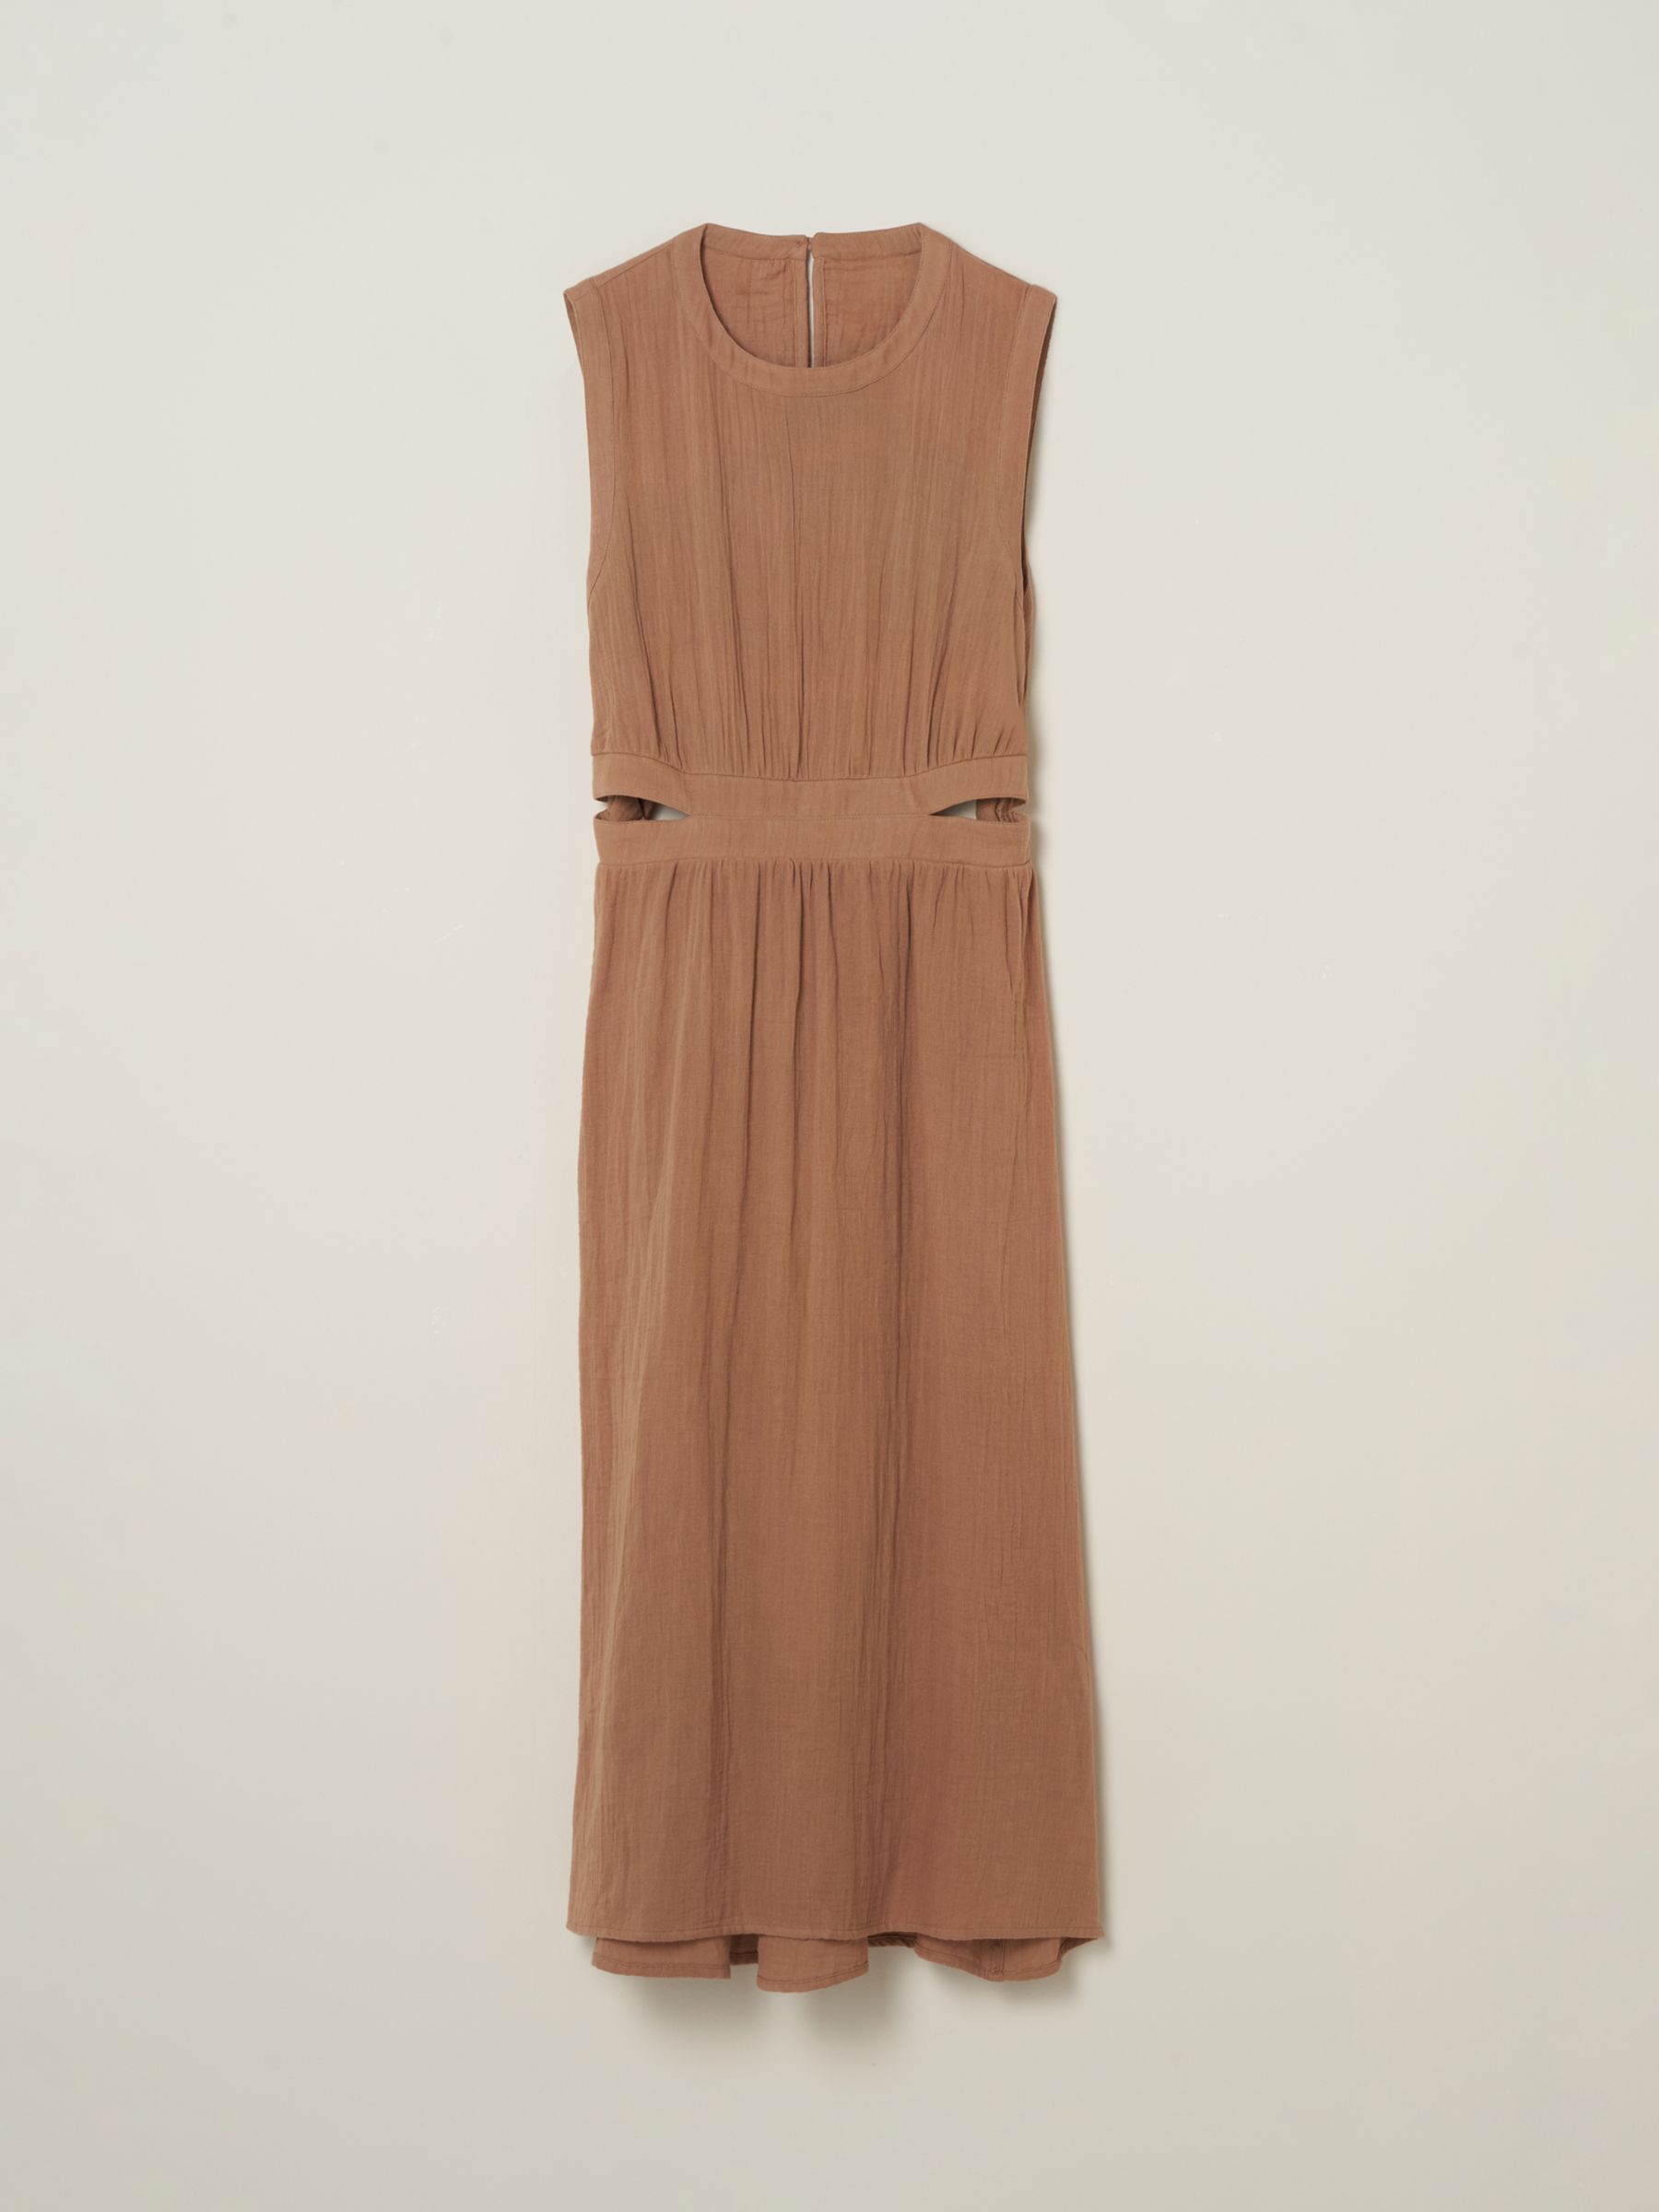 Buy Truly Cotton Cheesecloth Midi Dress Online at johnlewis.com